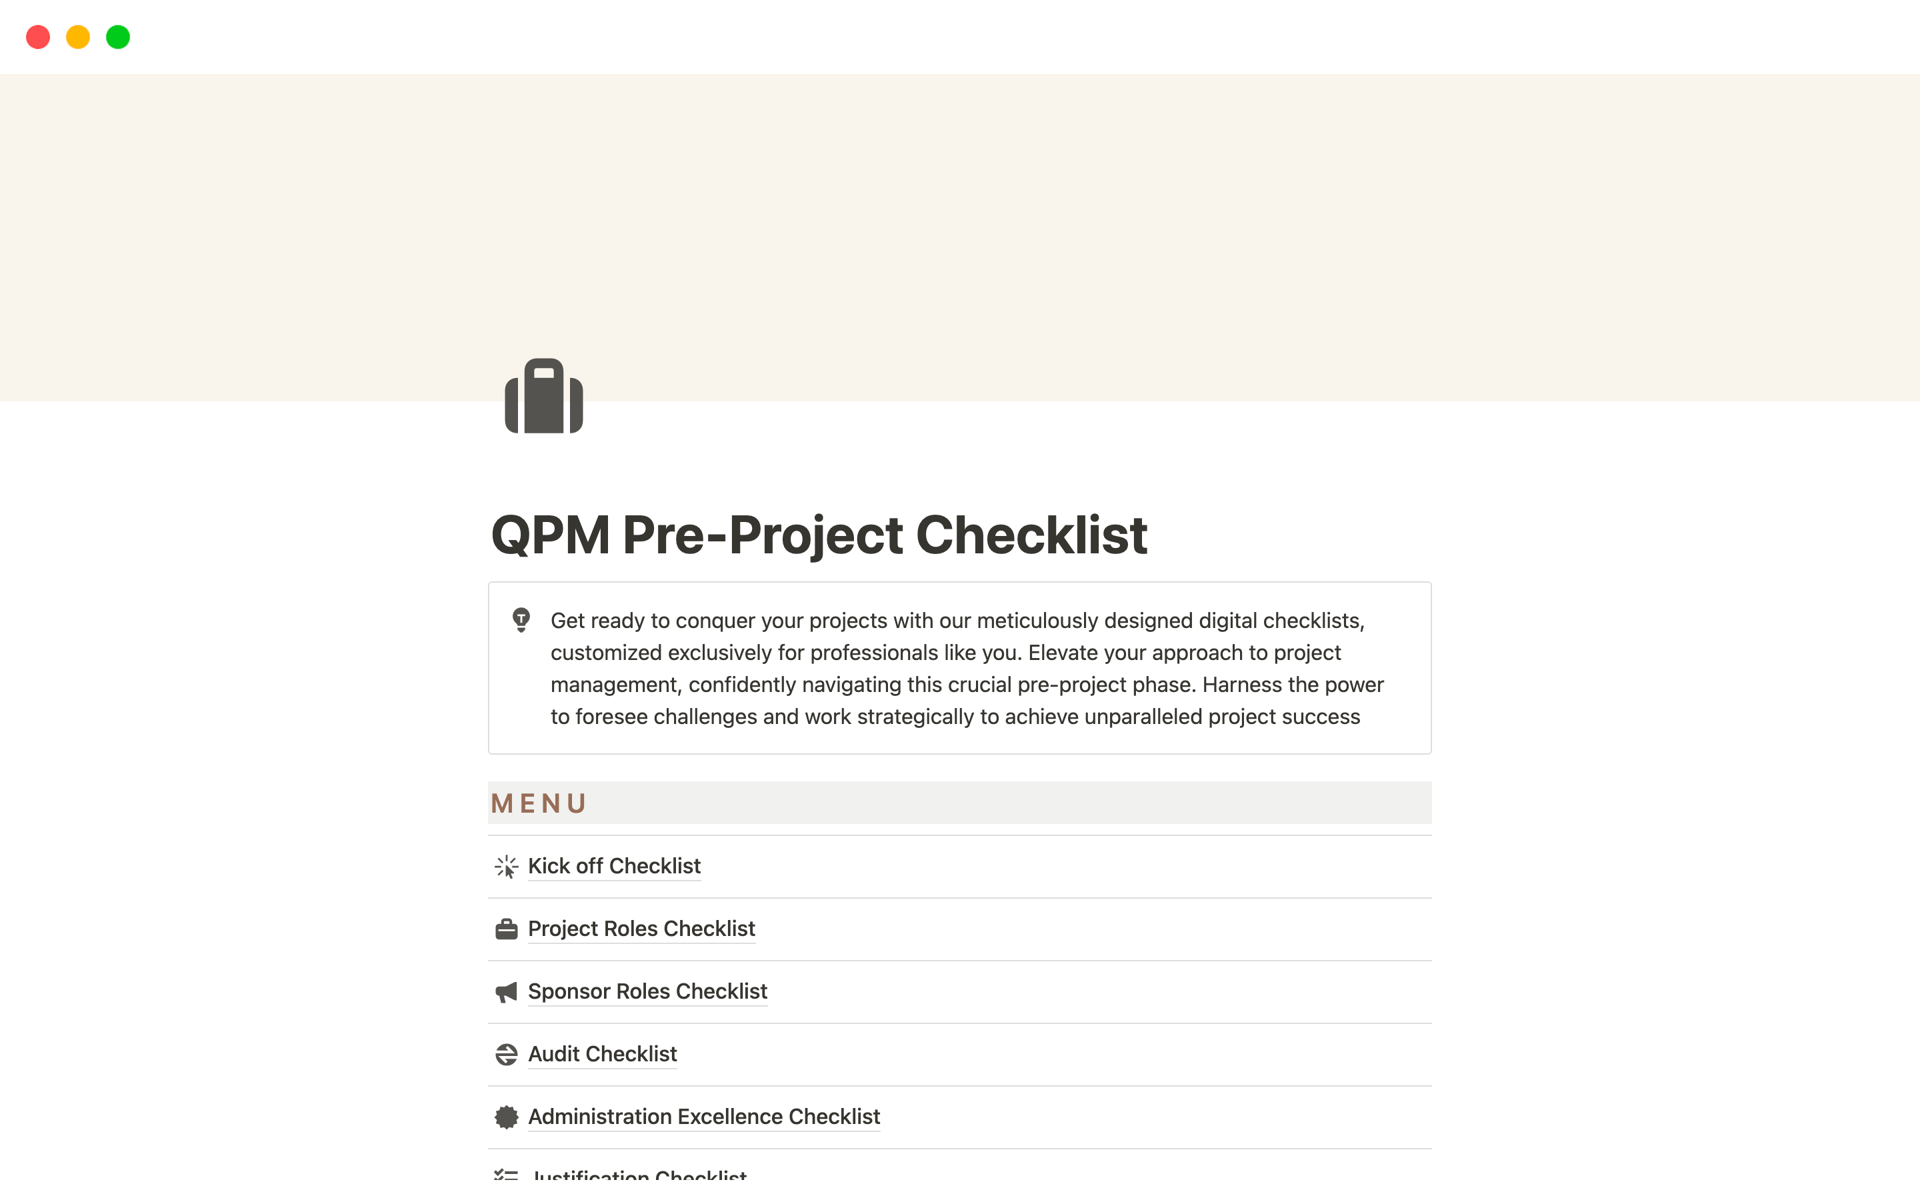 A bundle of 10 helpful professional checklist for the pre-project phase